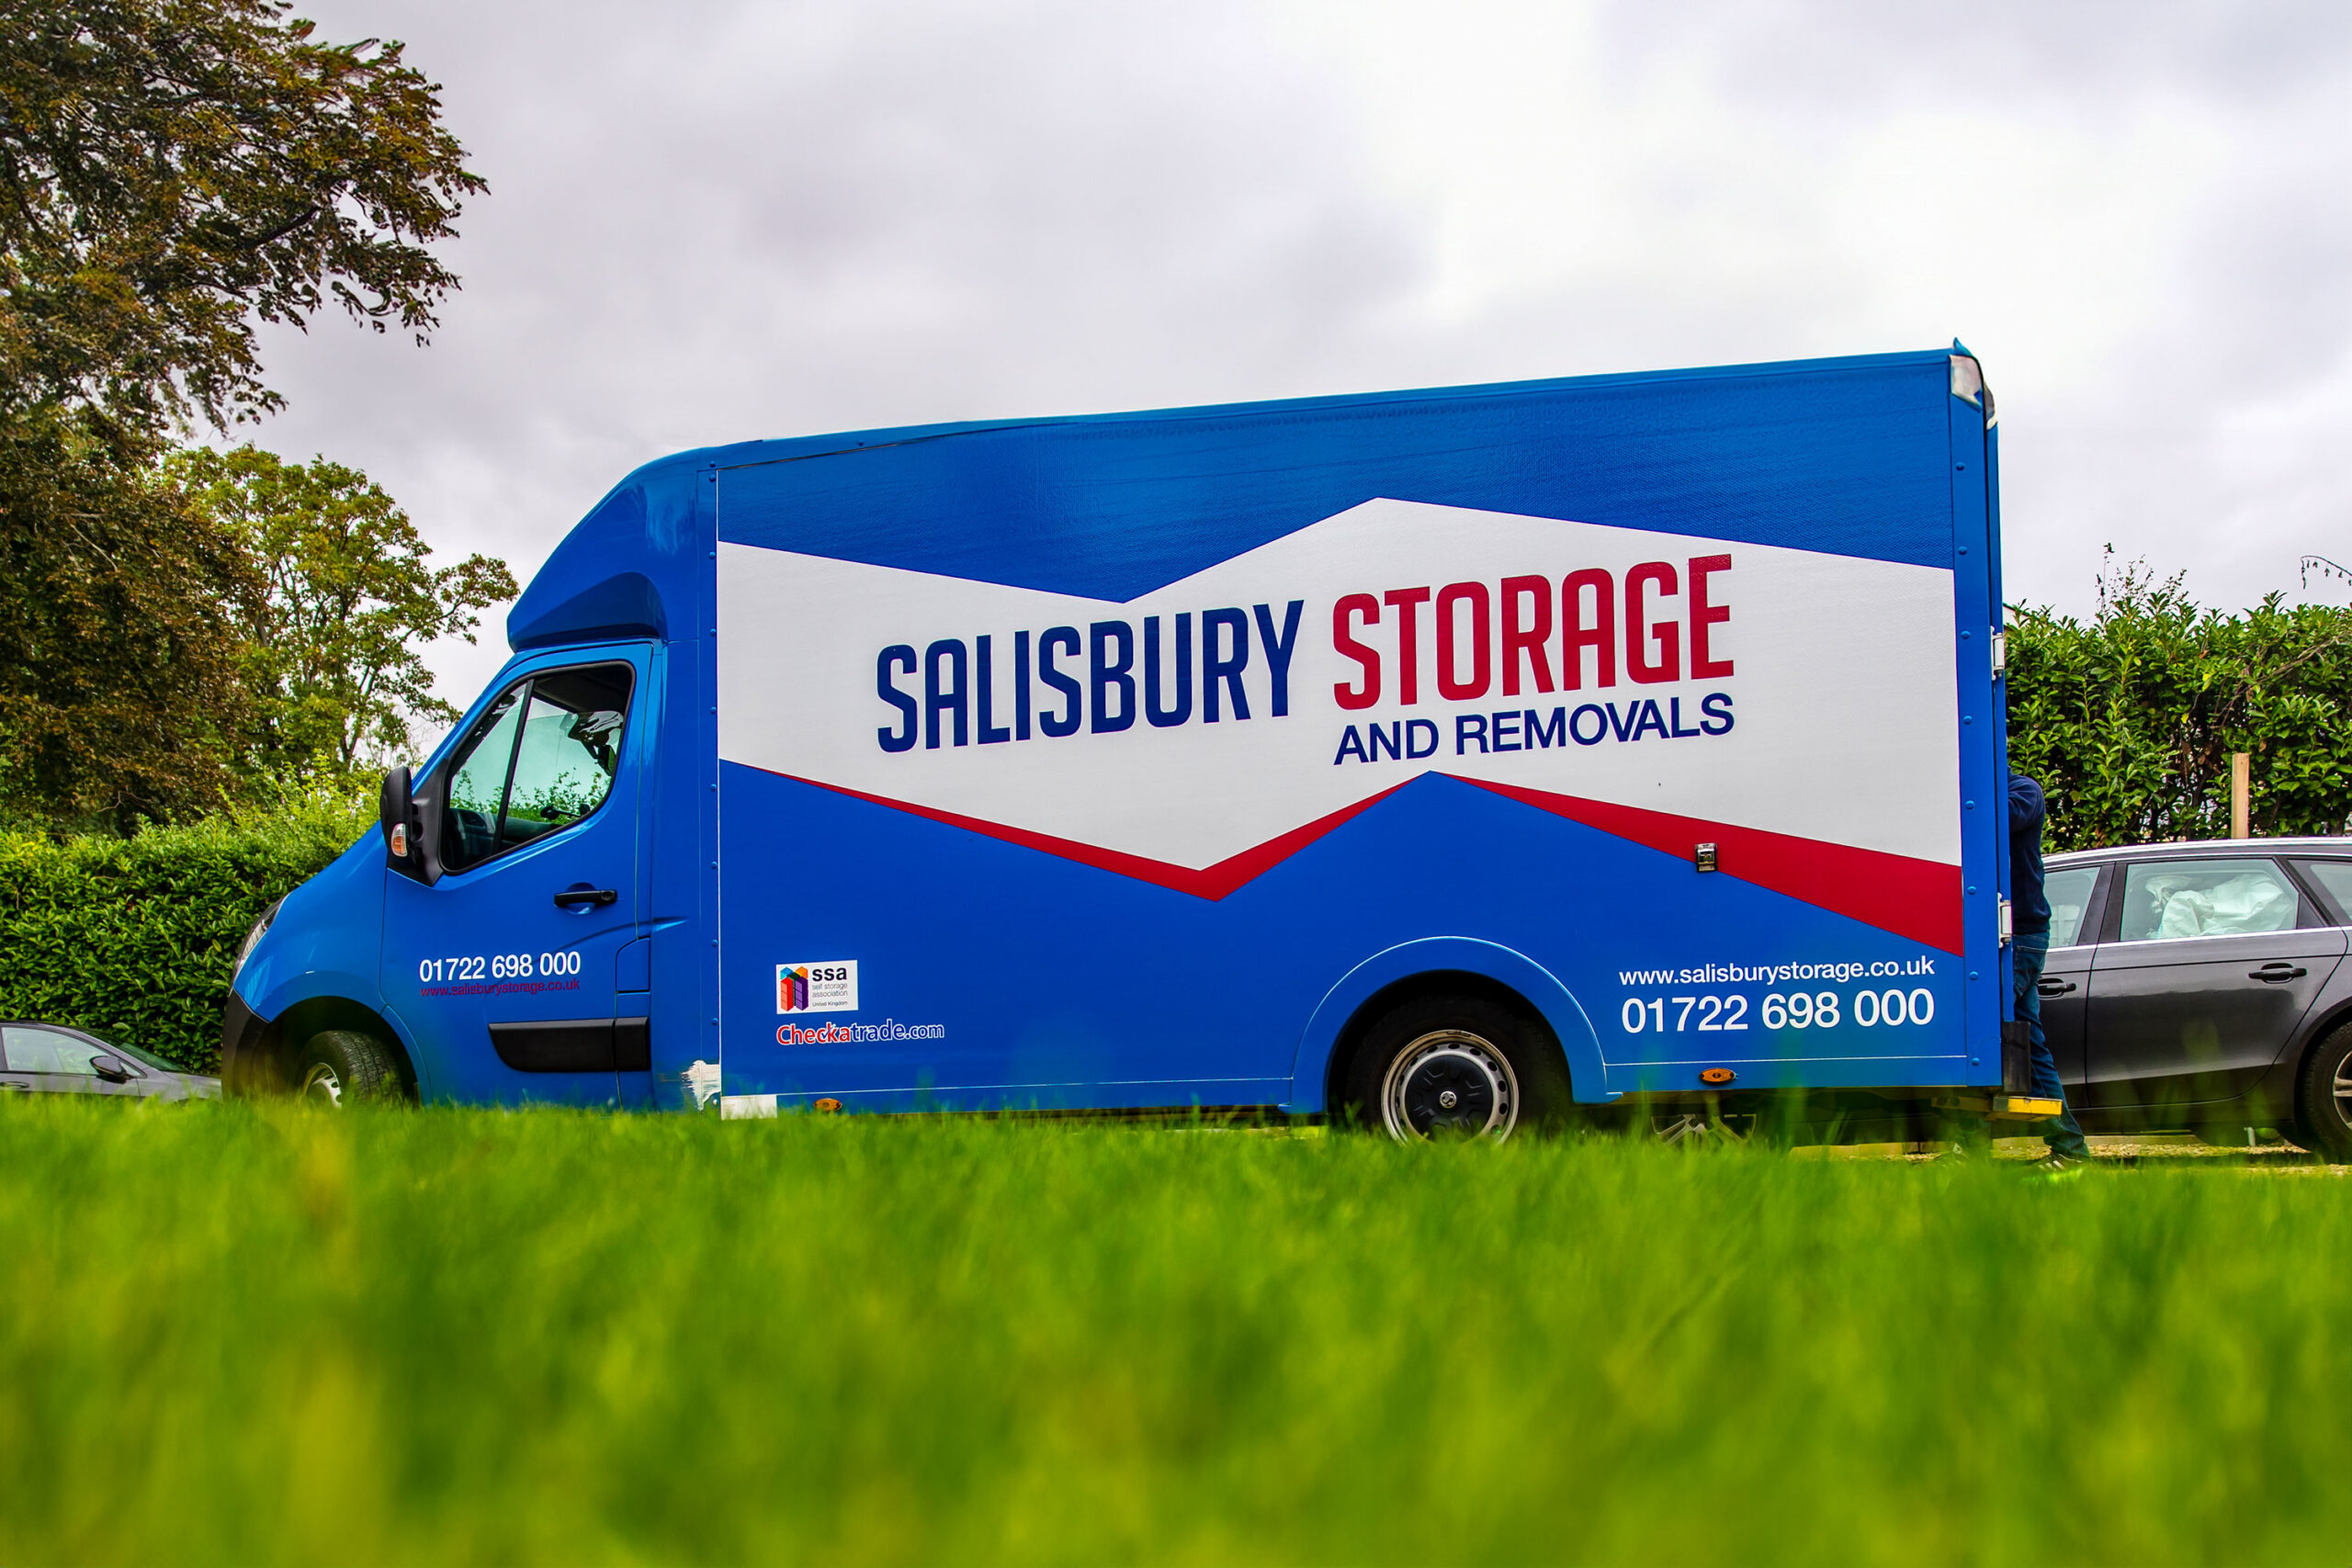 Salisbury storage and removals van parked on a drive with close up of blurry grass at the bottom.